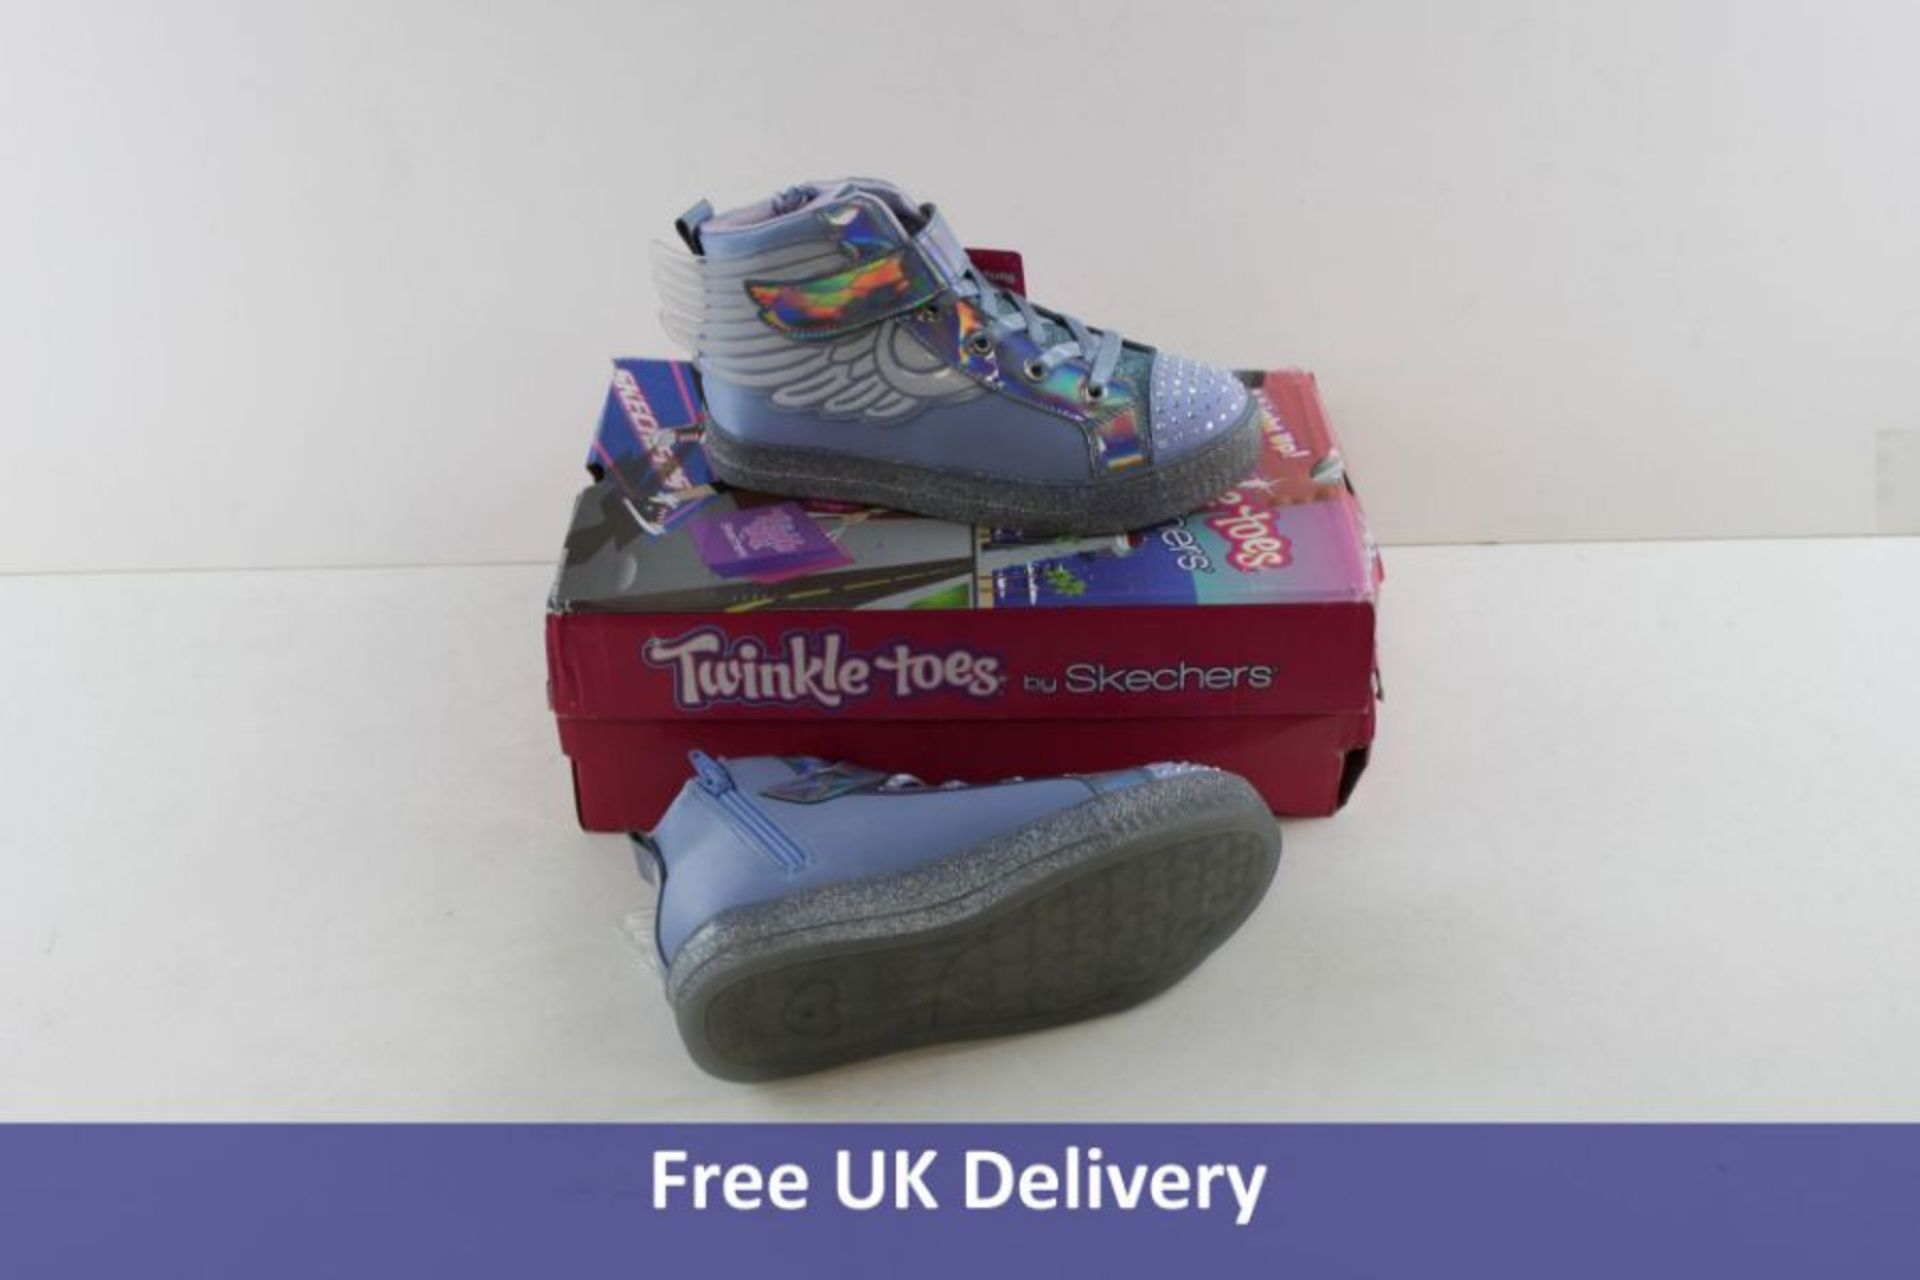 Skechers Girl's Shuffle Brights Sparkle Wings Trainers, Periwinkle, UK 2. Box damaged